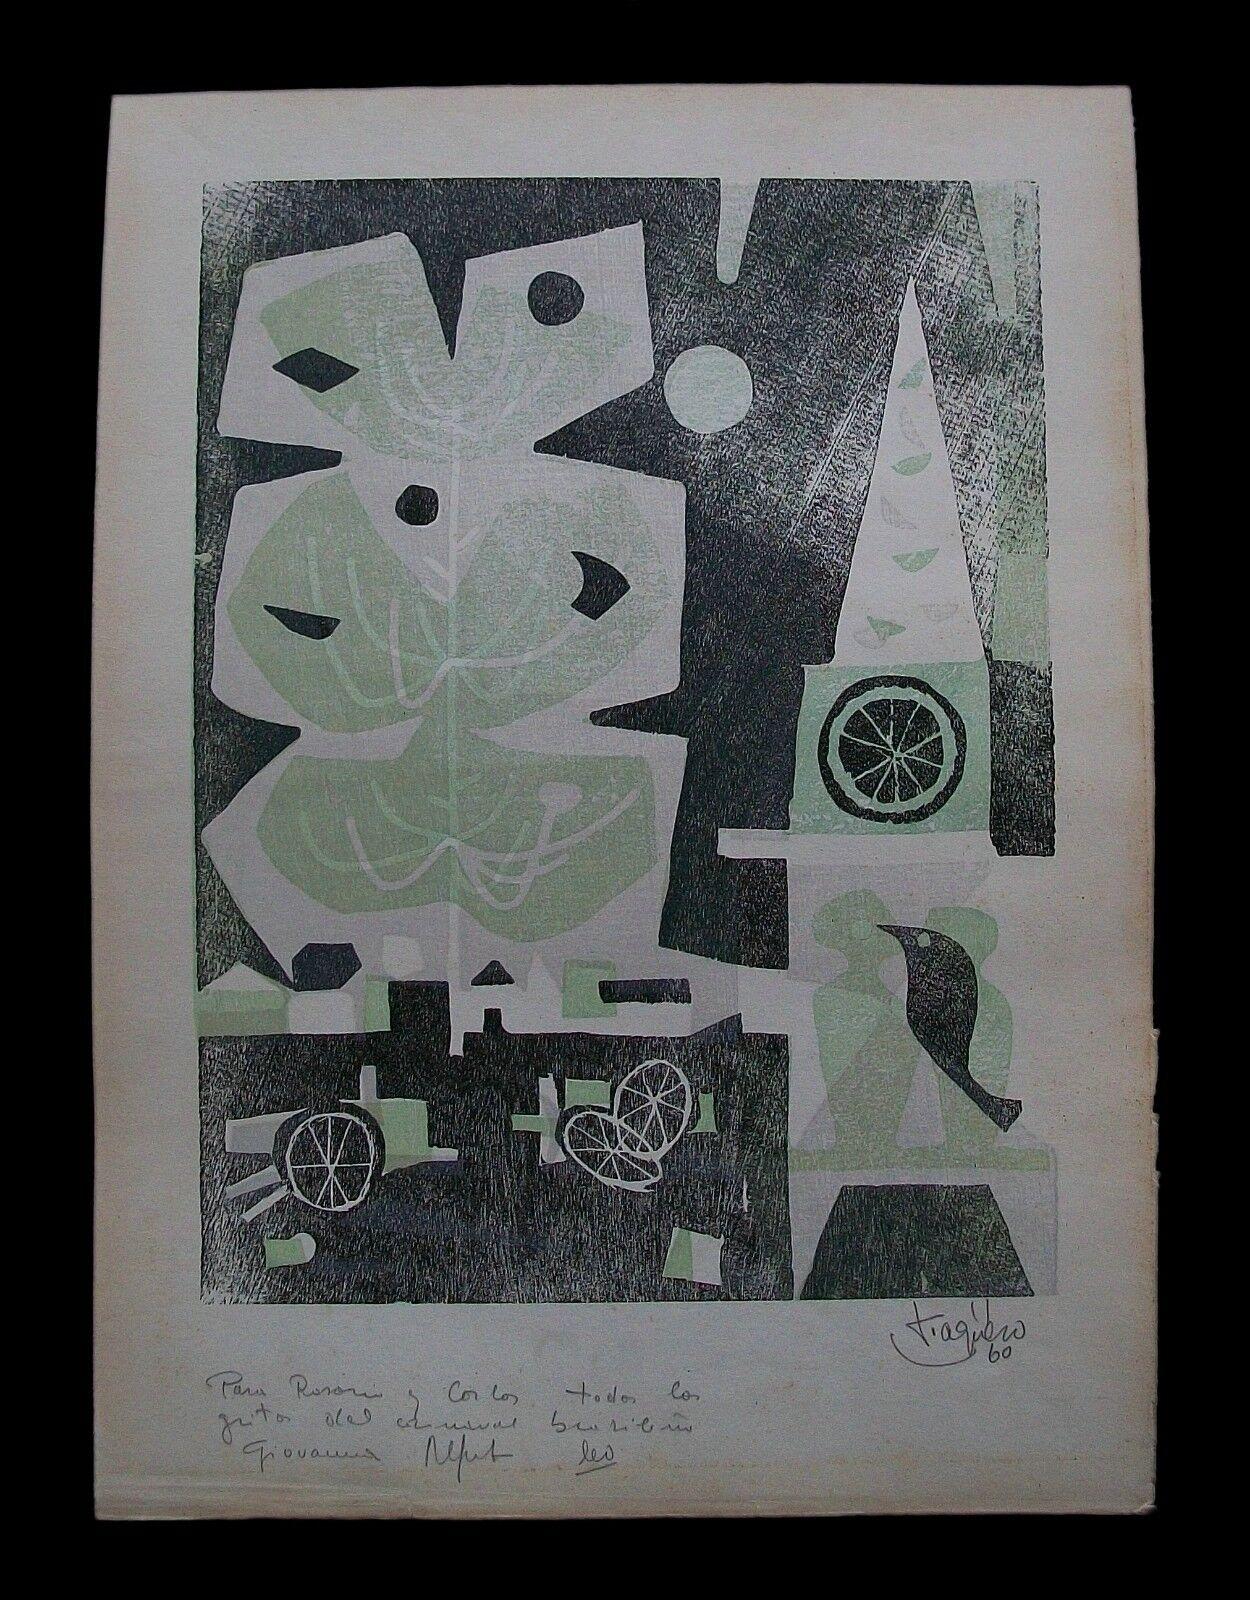 Leopoldo Torres Agüero (b.1924 Argentina - d.1995 France) - 'Untitled' - Rare and early Mid-Century Modern three color monotype on buff paper - signed and dated lower right - signed and dedicated (in Spanish) lower left - unframed - France/Argentina